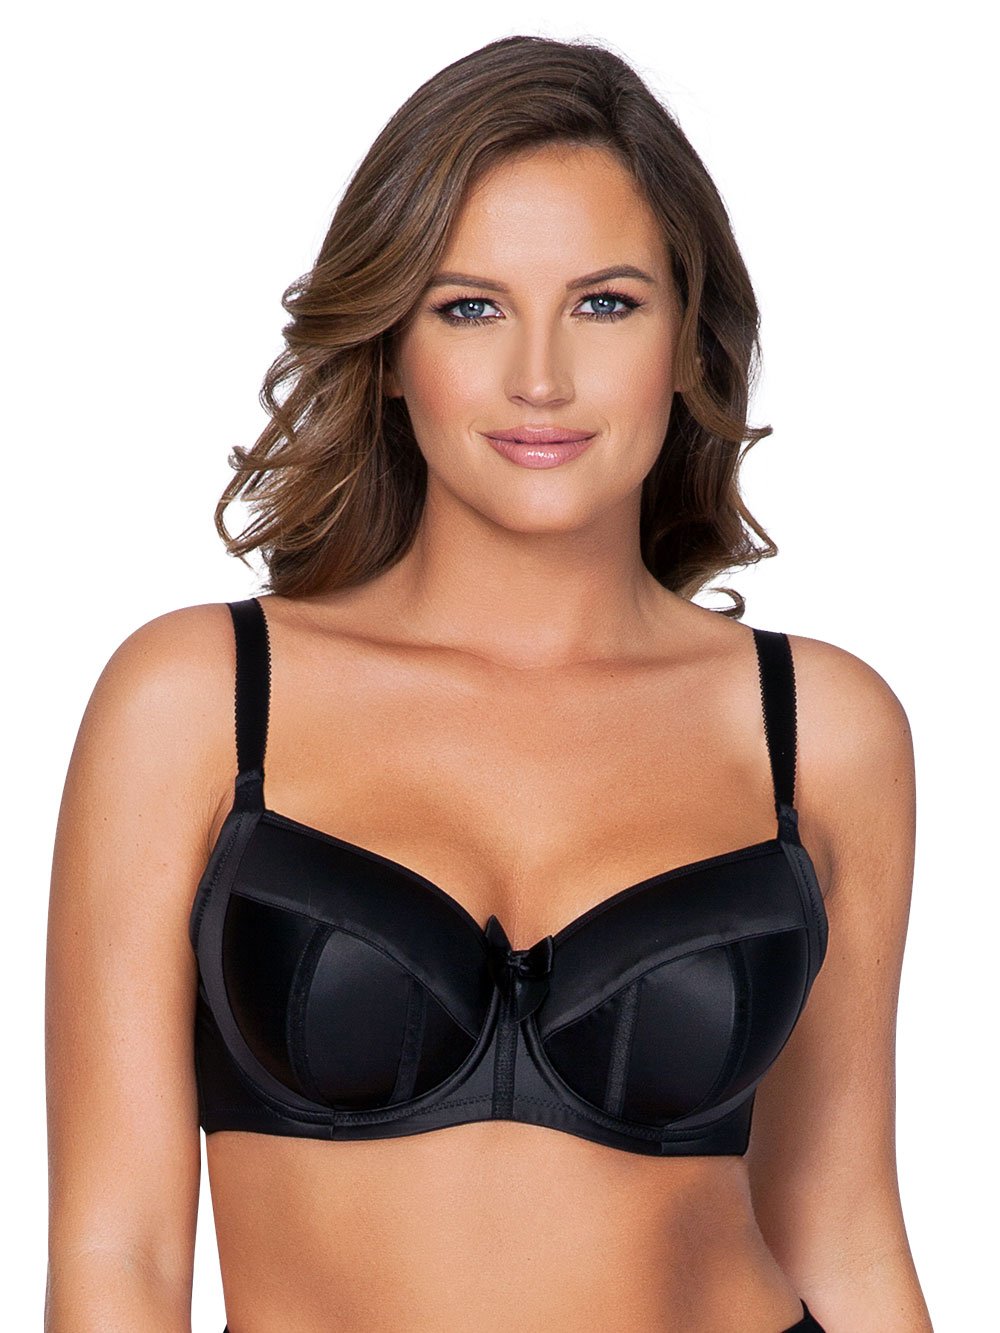 DD Cup Bras: Double D Boobs Bra Cup Sizes Tagged Plus Size Bras -  HauteFlair